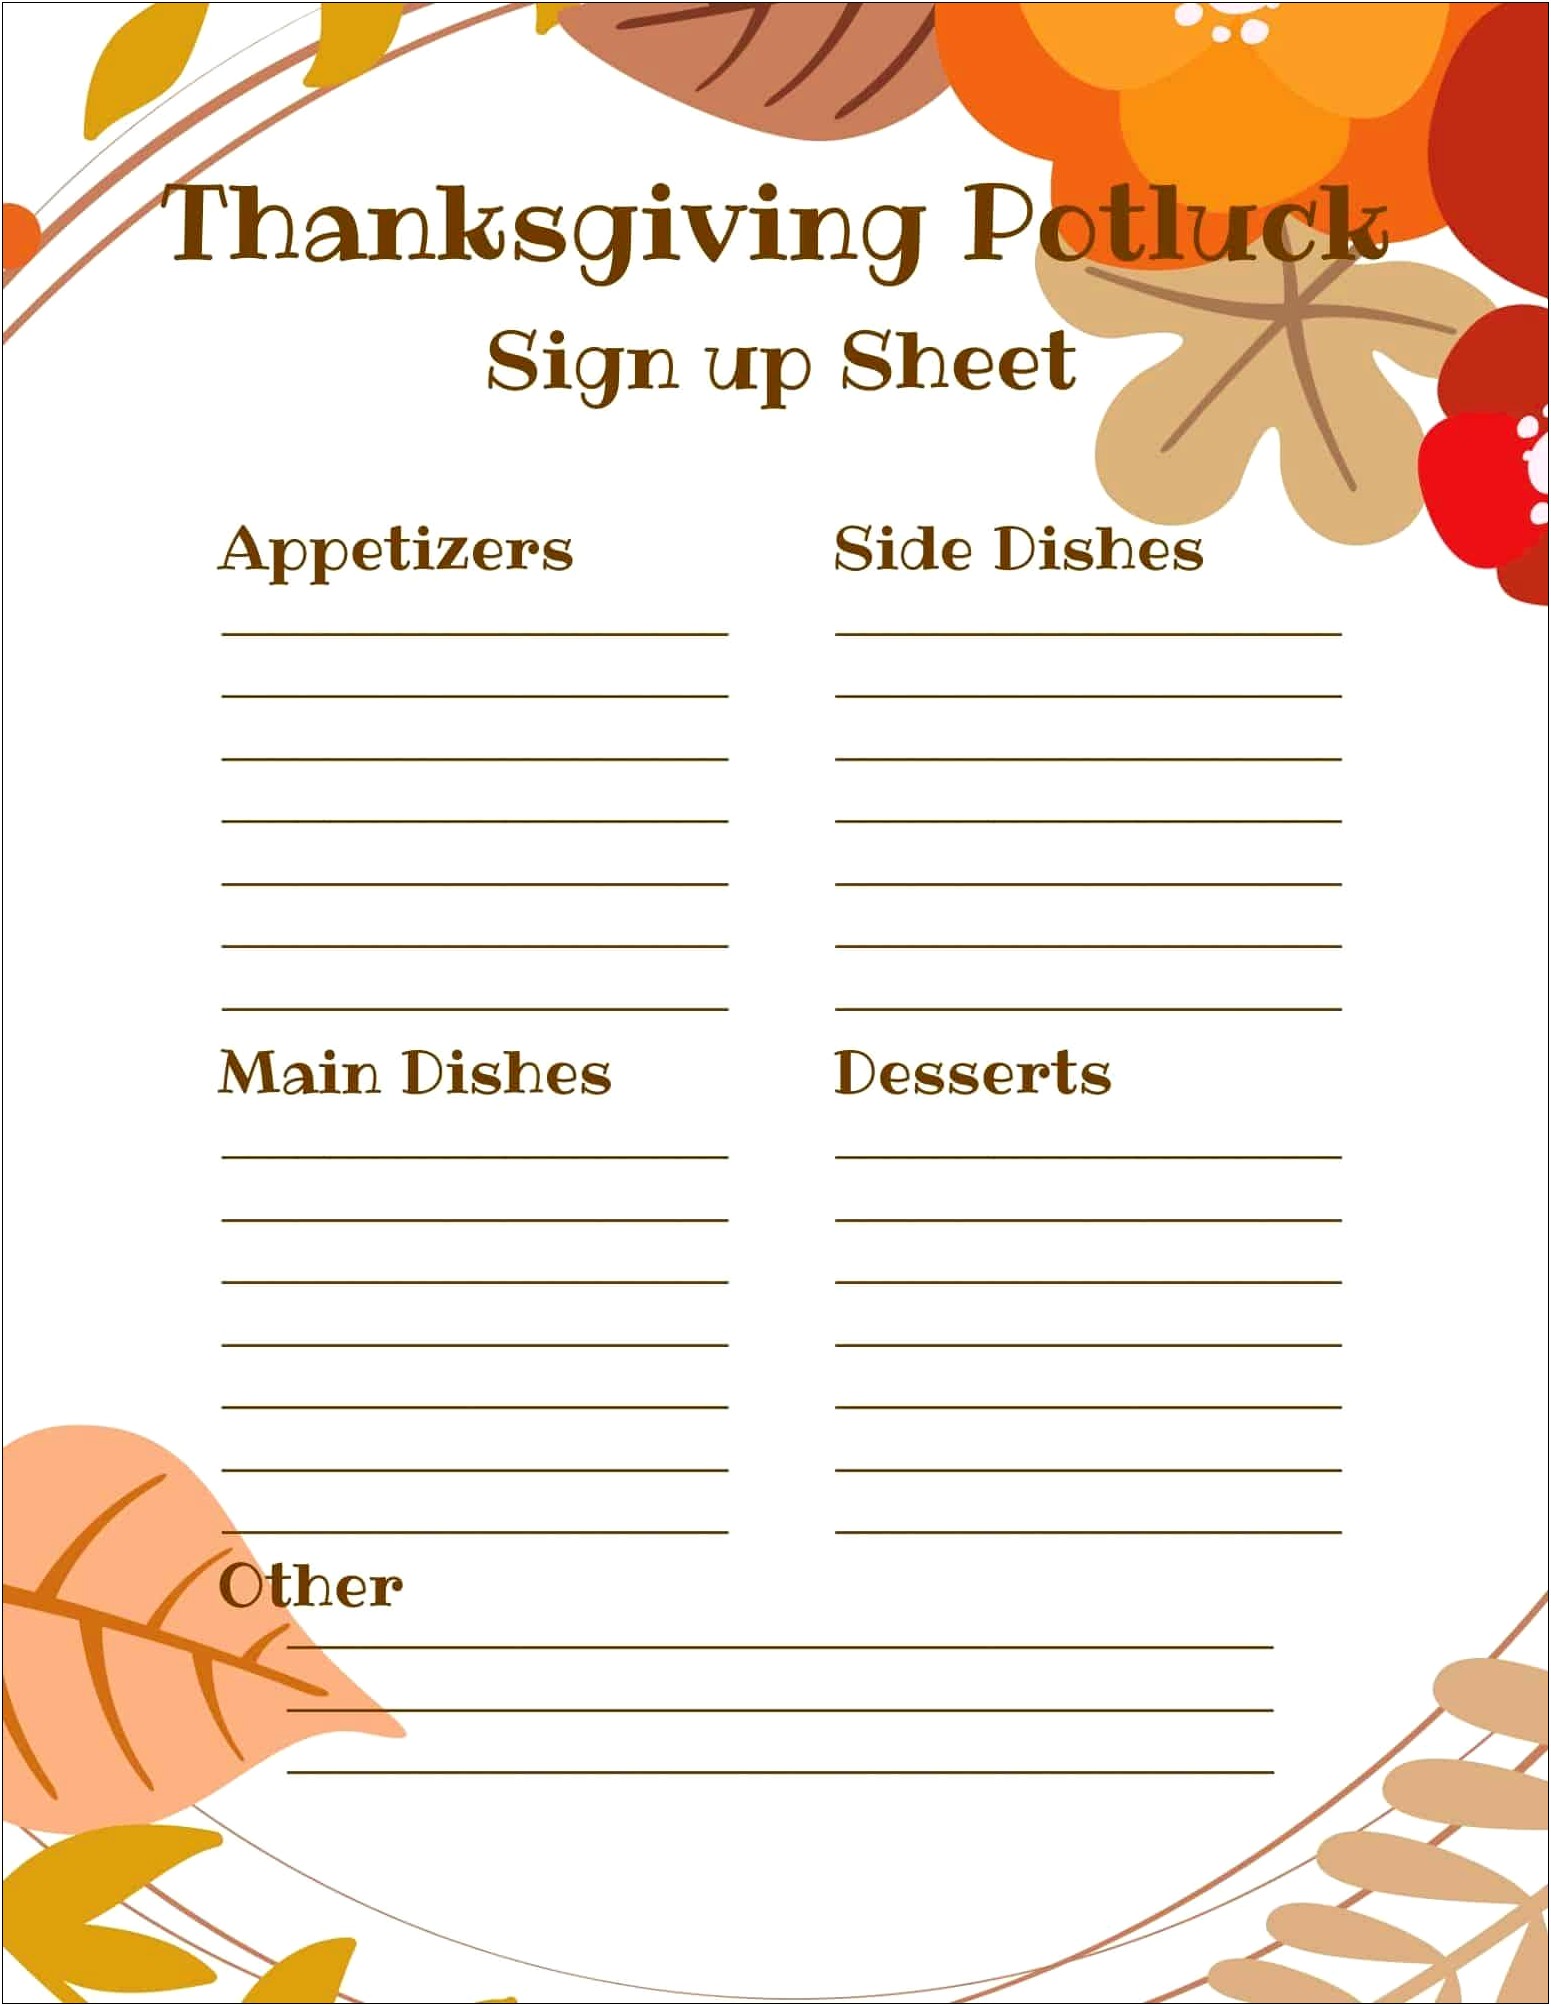 Potluck Sign Up Sheet Template Excel Free